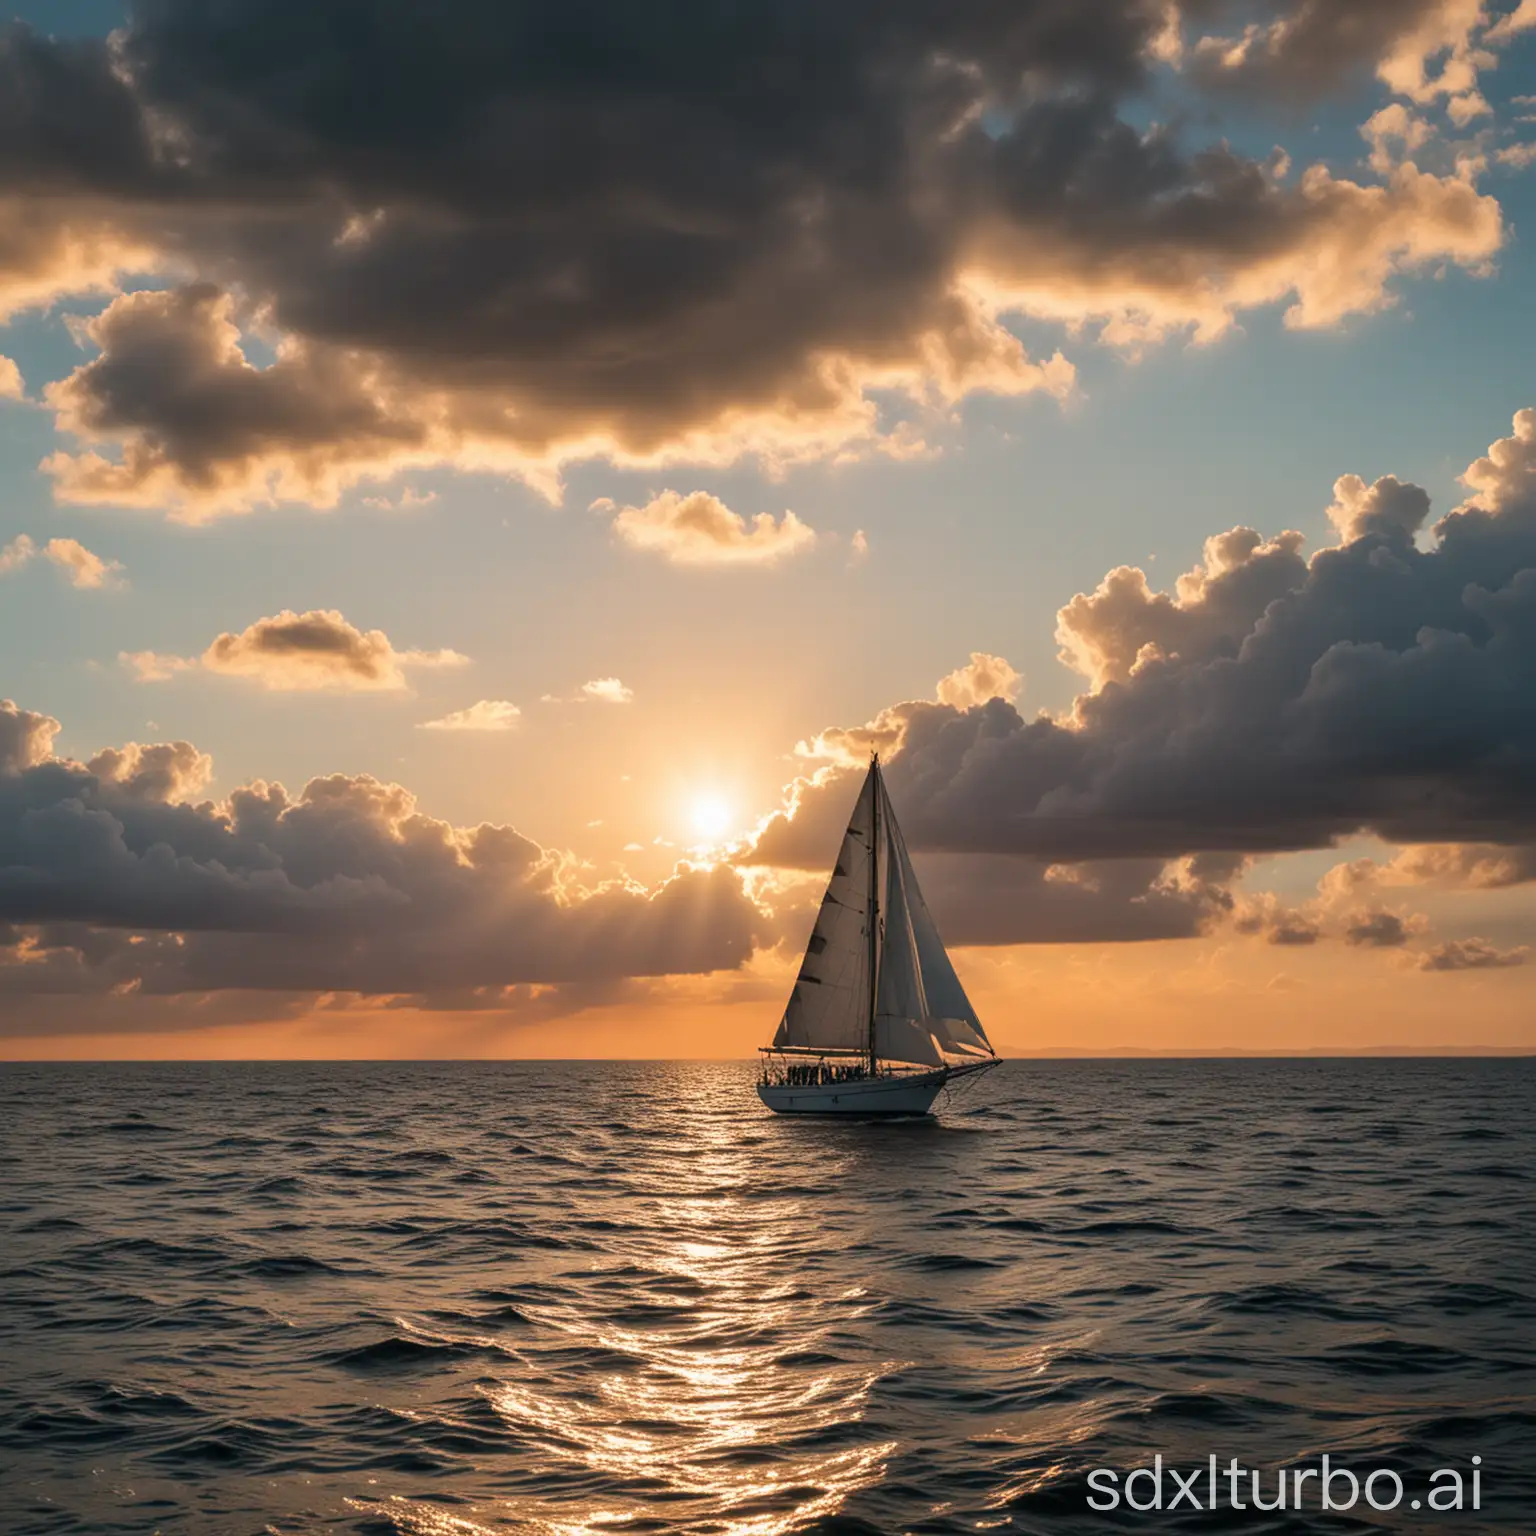 Sailboat-Sailing-into-the-Sunset-Tranquil-Scene-of-WhiteSailed-Boat-Drifting-Away-at-Sea